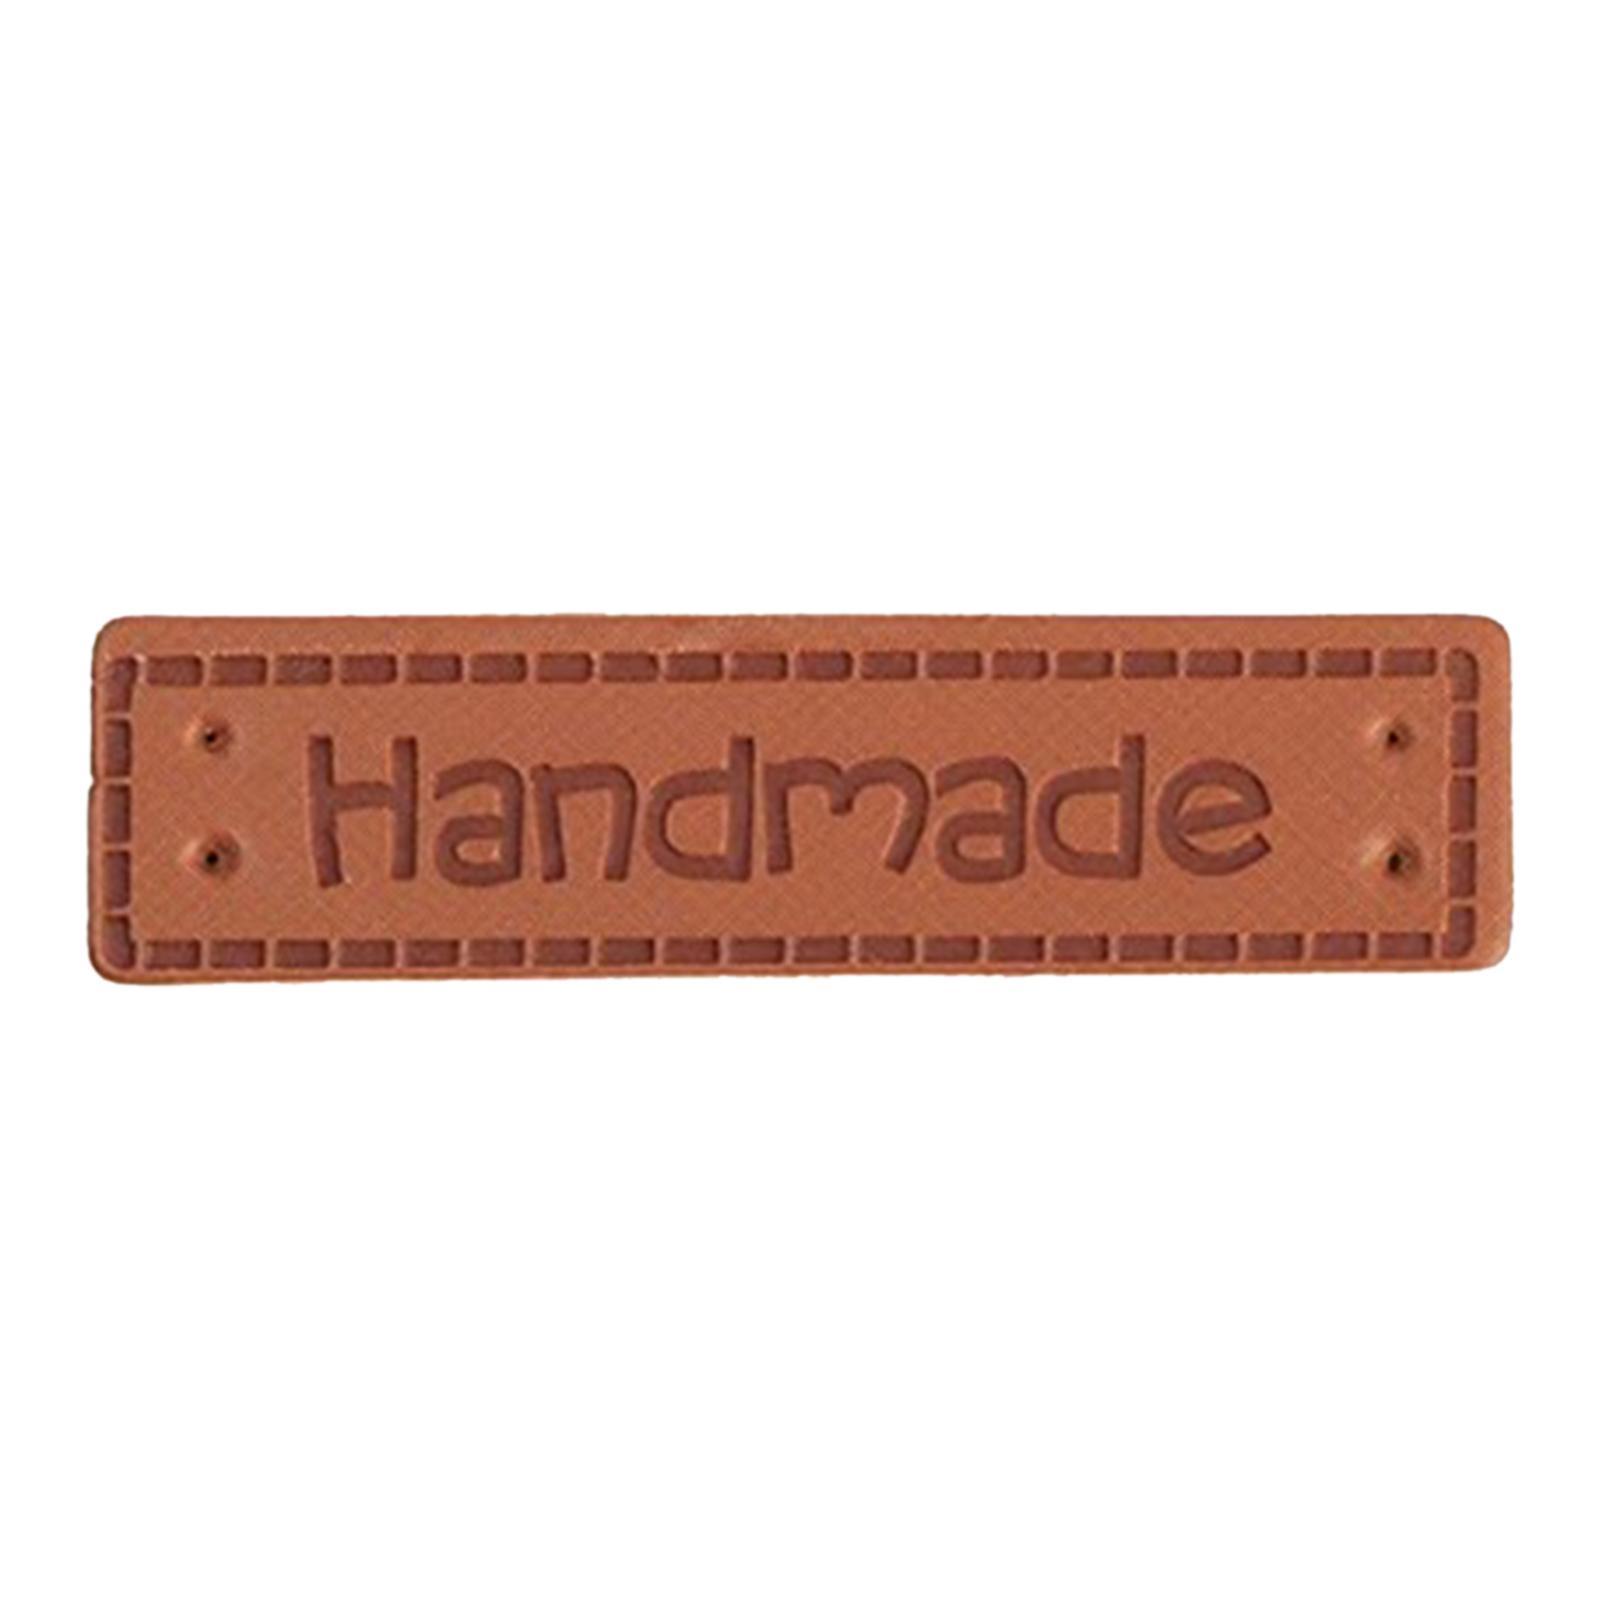 20 Pieces PU Leather Label Handmade Tag Label Embellishments Supplies B